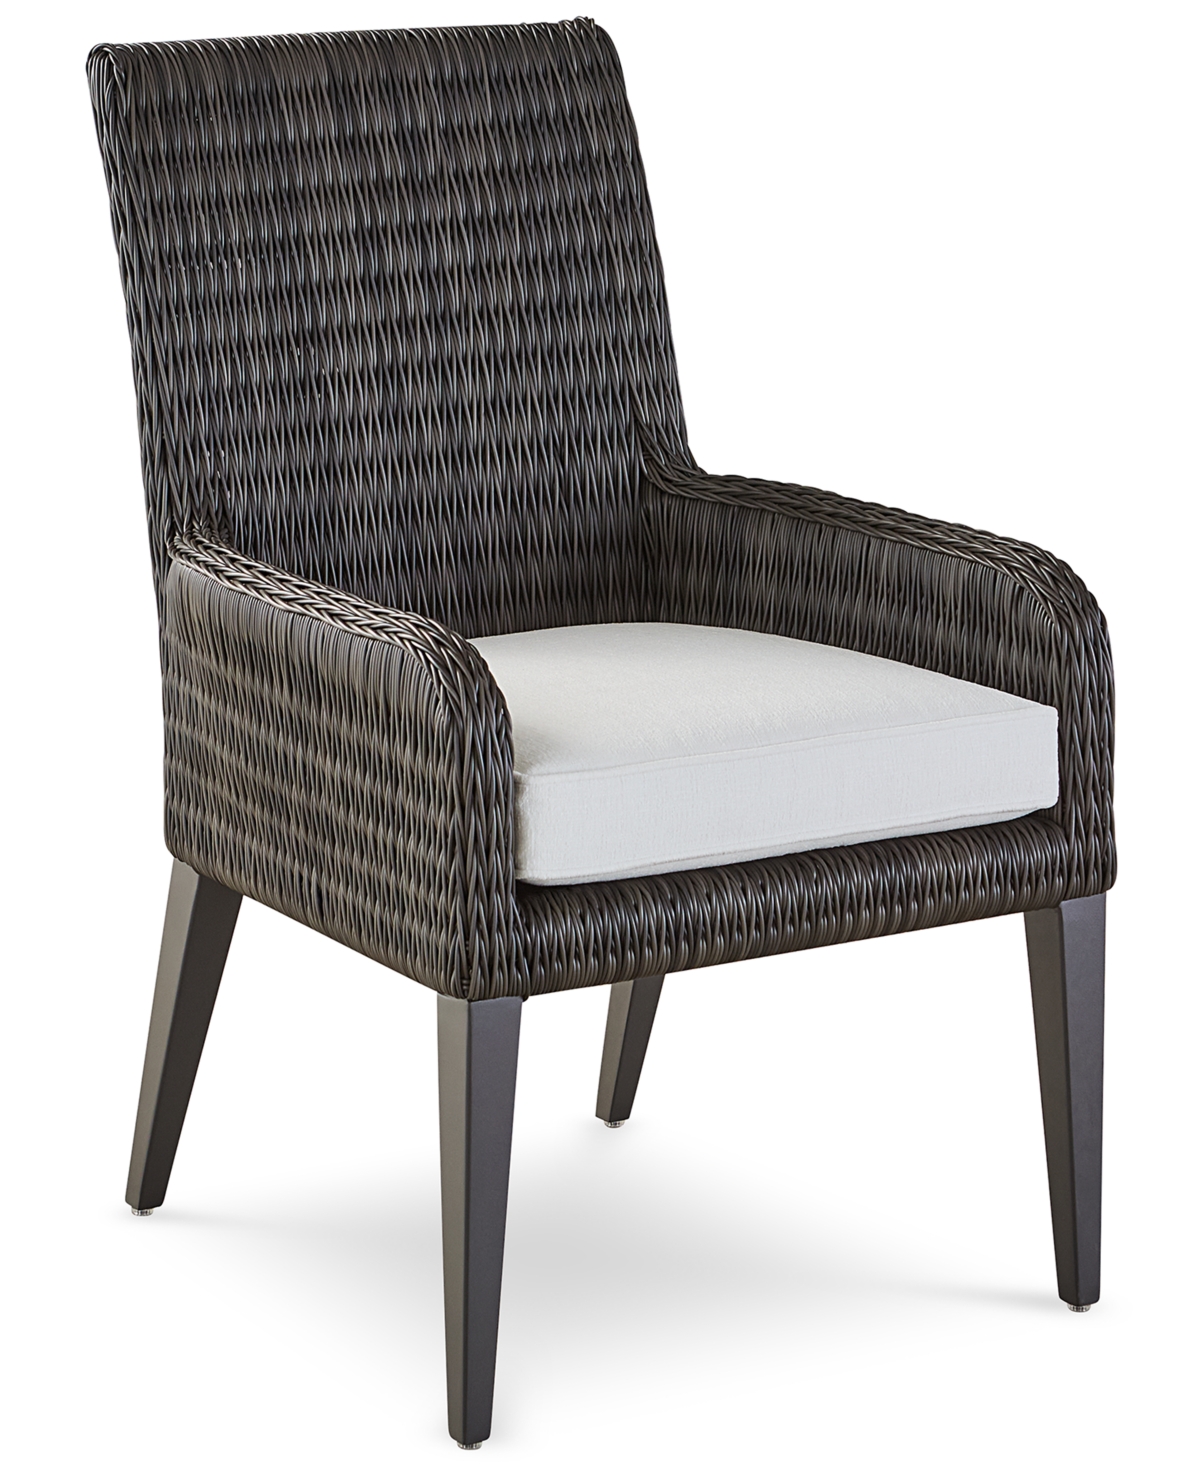 Tommy Bahama Cypress Point Outdoor Dining Chair In Parchment